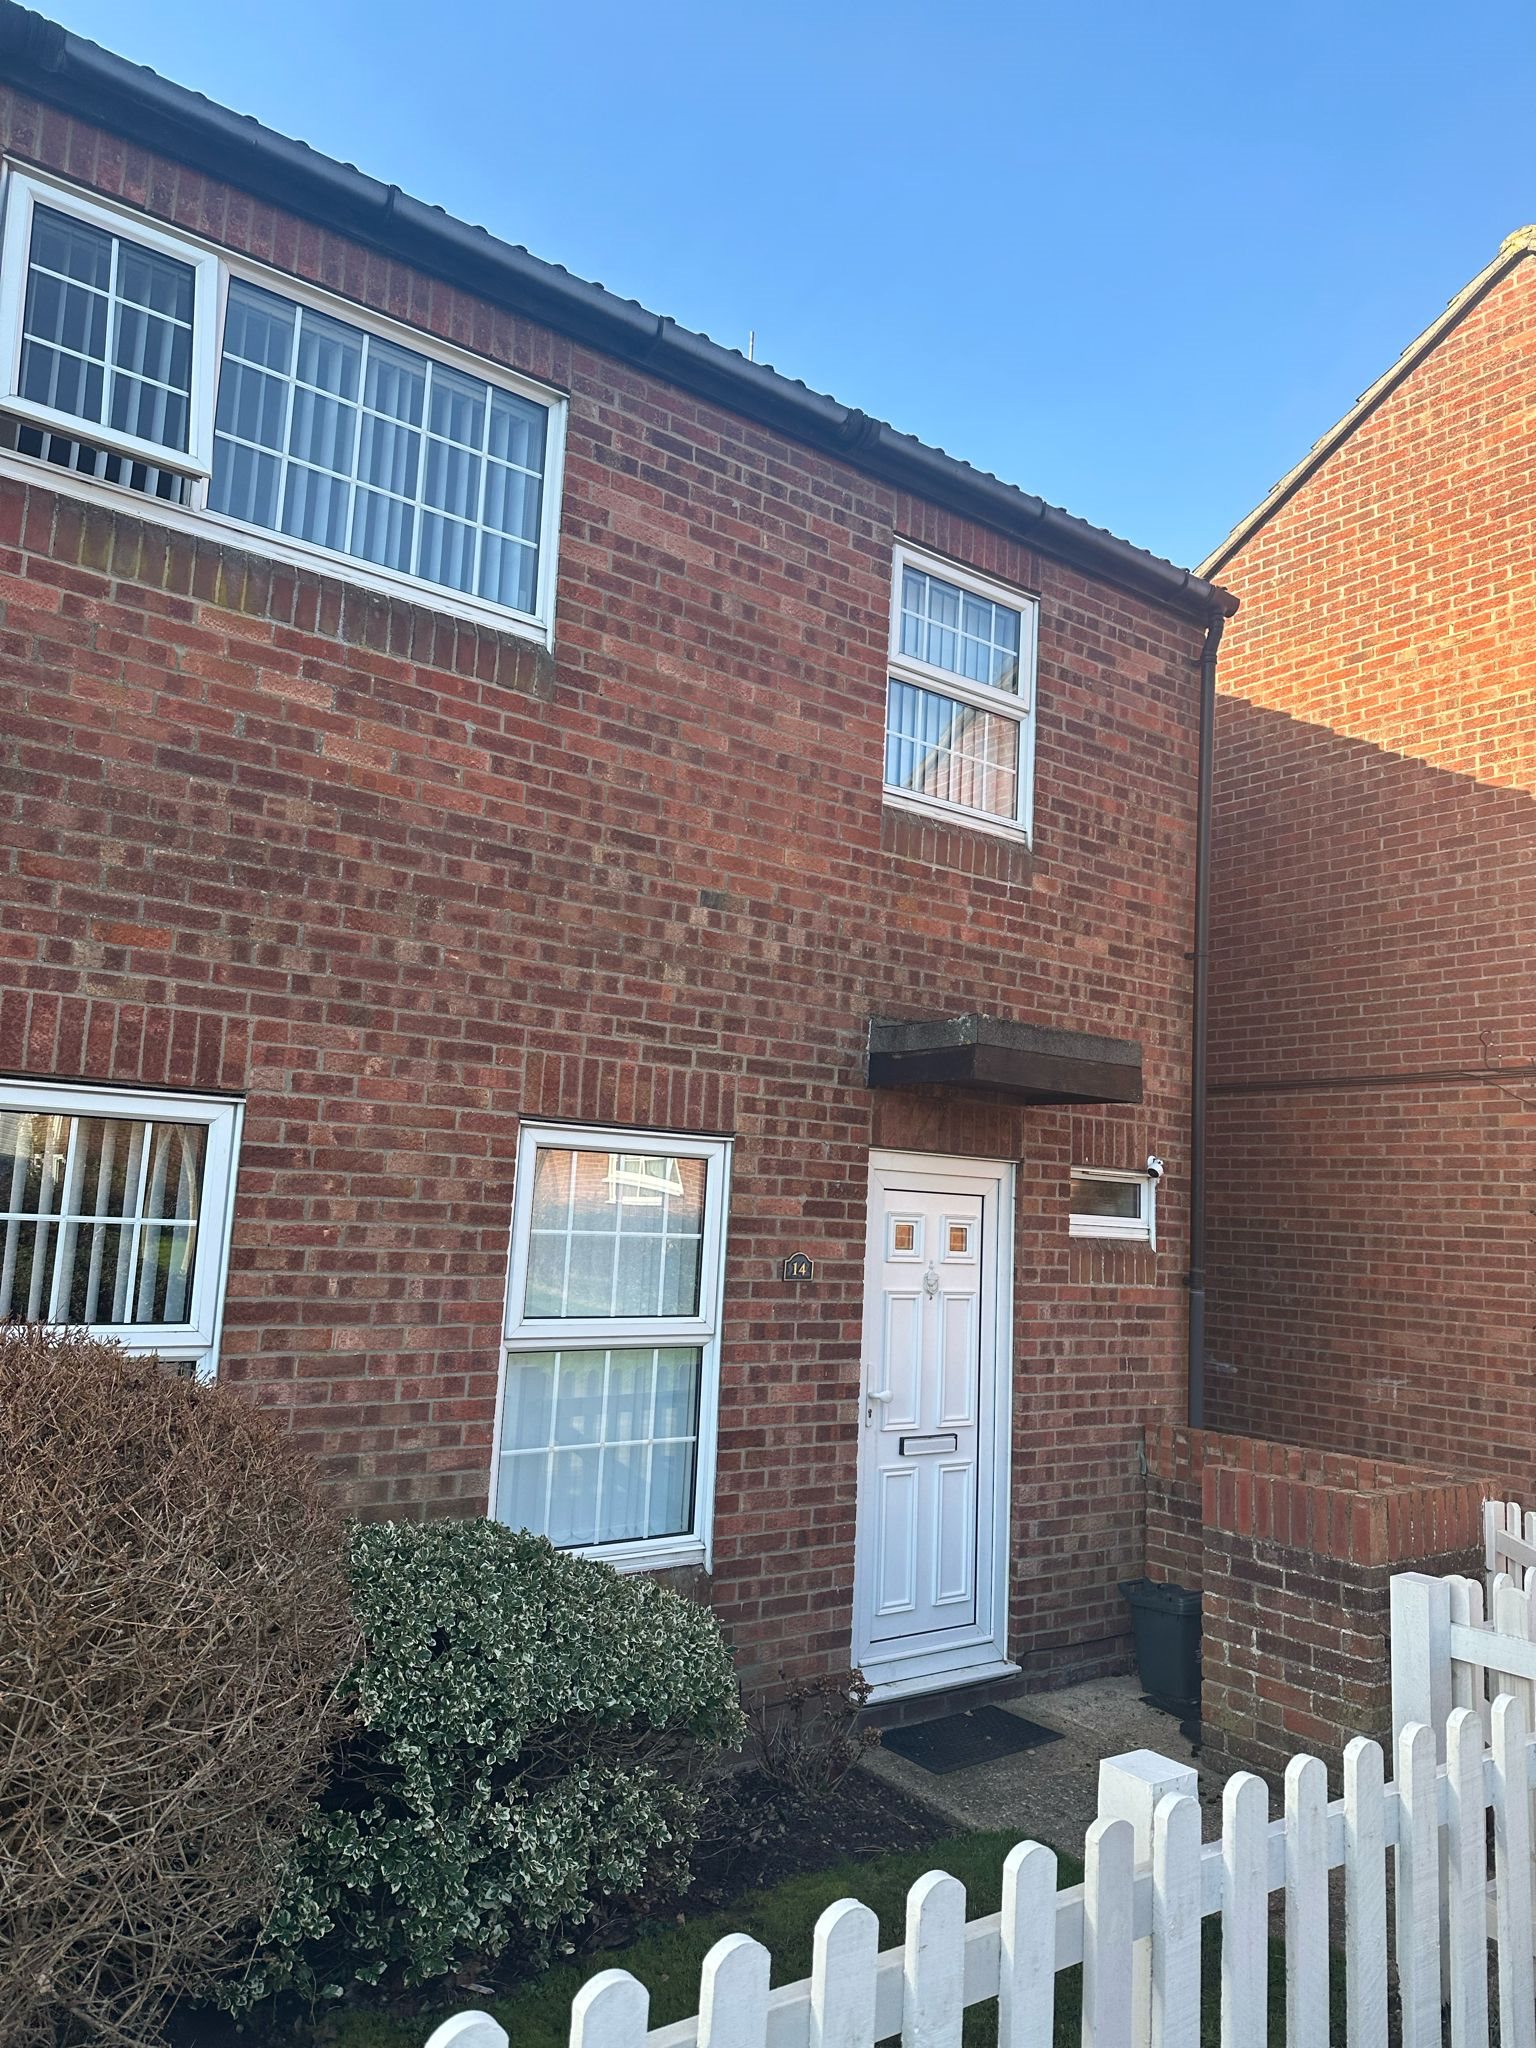 4 bed house to rent in Affleck Road, Colchester, CO4 